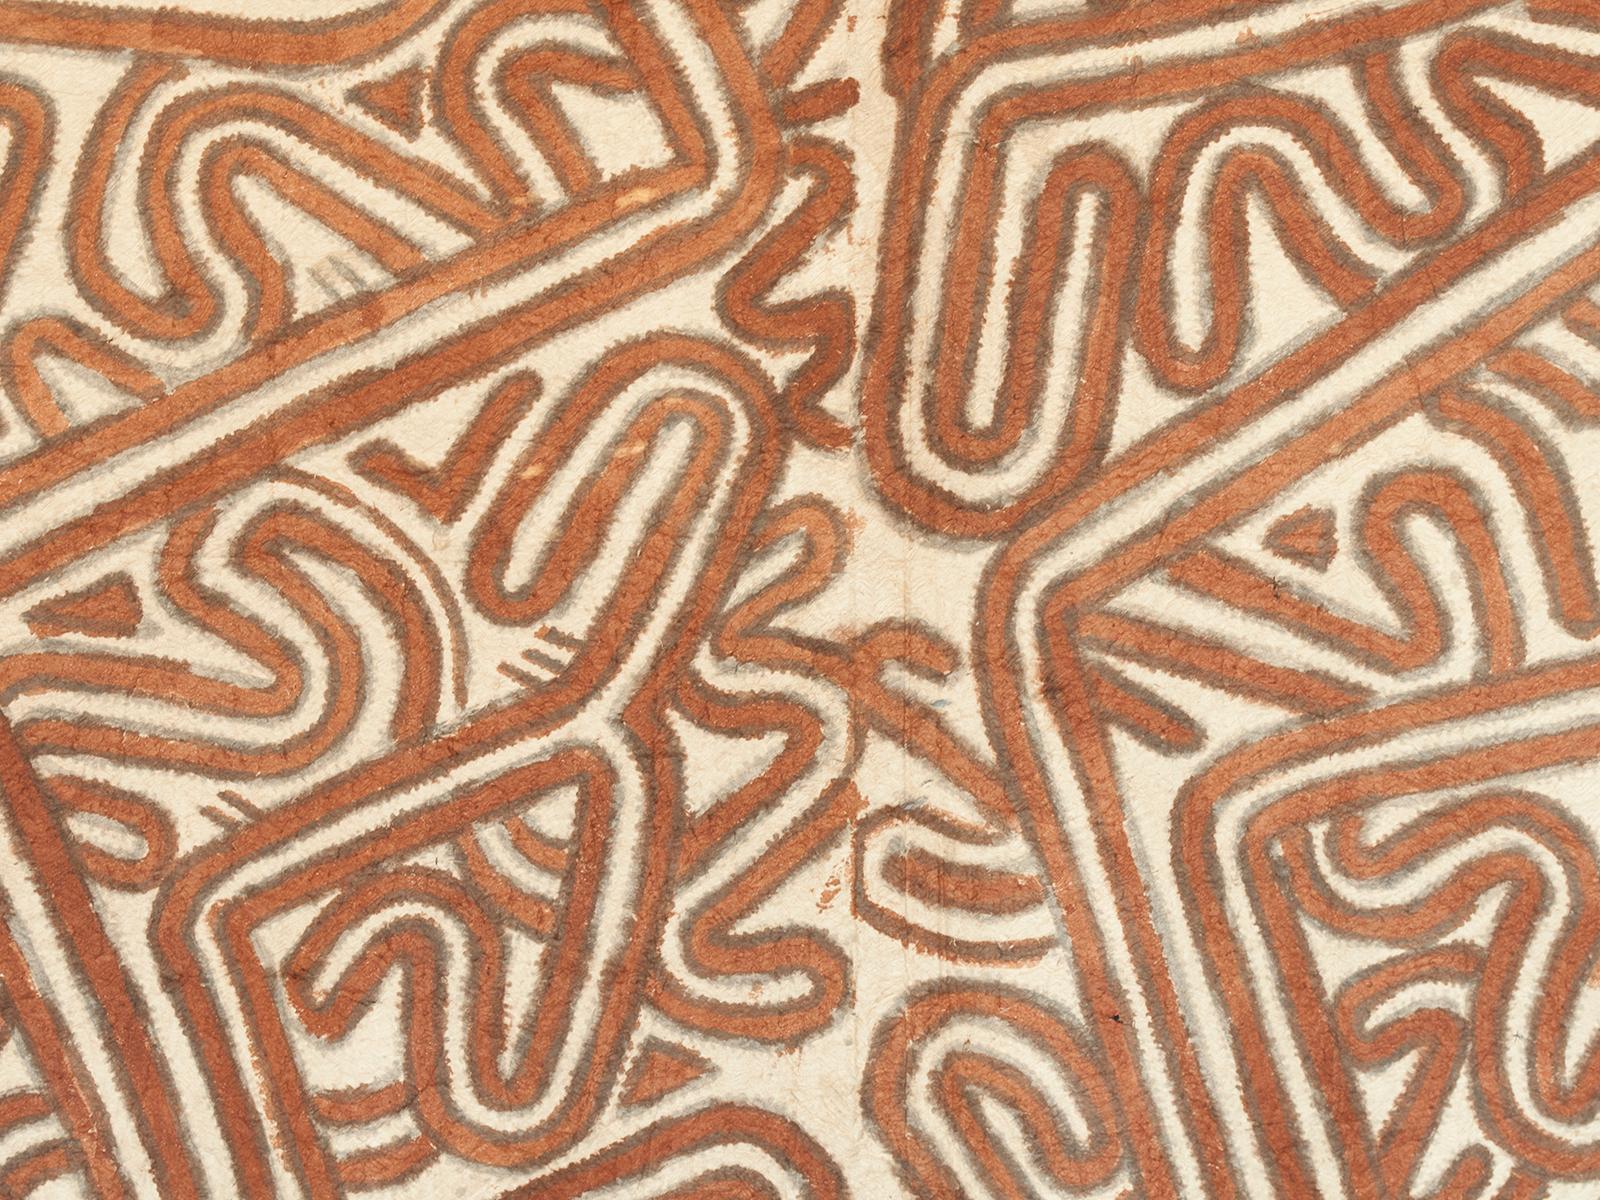 Offered by Zena Kruzick
Mid-20th century Tapa cloth, Papua New Guinea

This graphic piece of tapa cloth was hand-painted with a natural dye with designs typical of Oro Province in Papua New Guinea. Probably from the 1970s or 1980s.